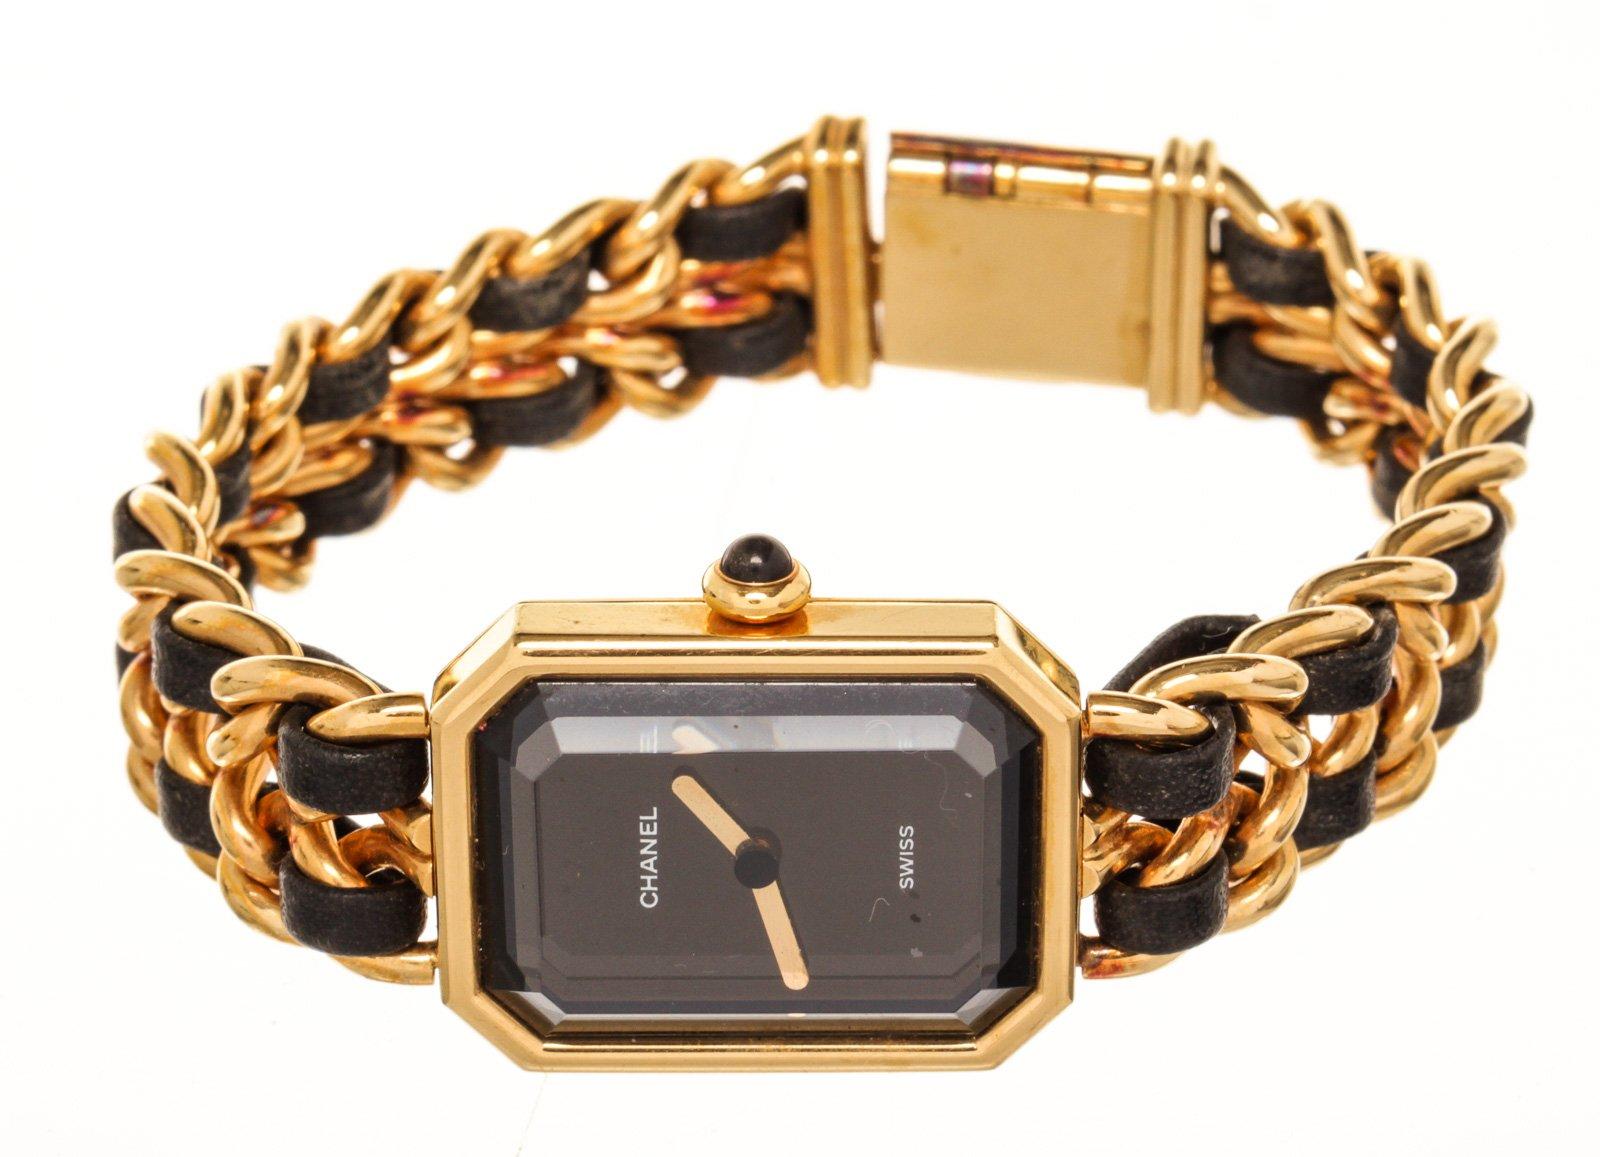 Chanel Gold Premiere L Watch with gold-tone hardware.

46161MSC